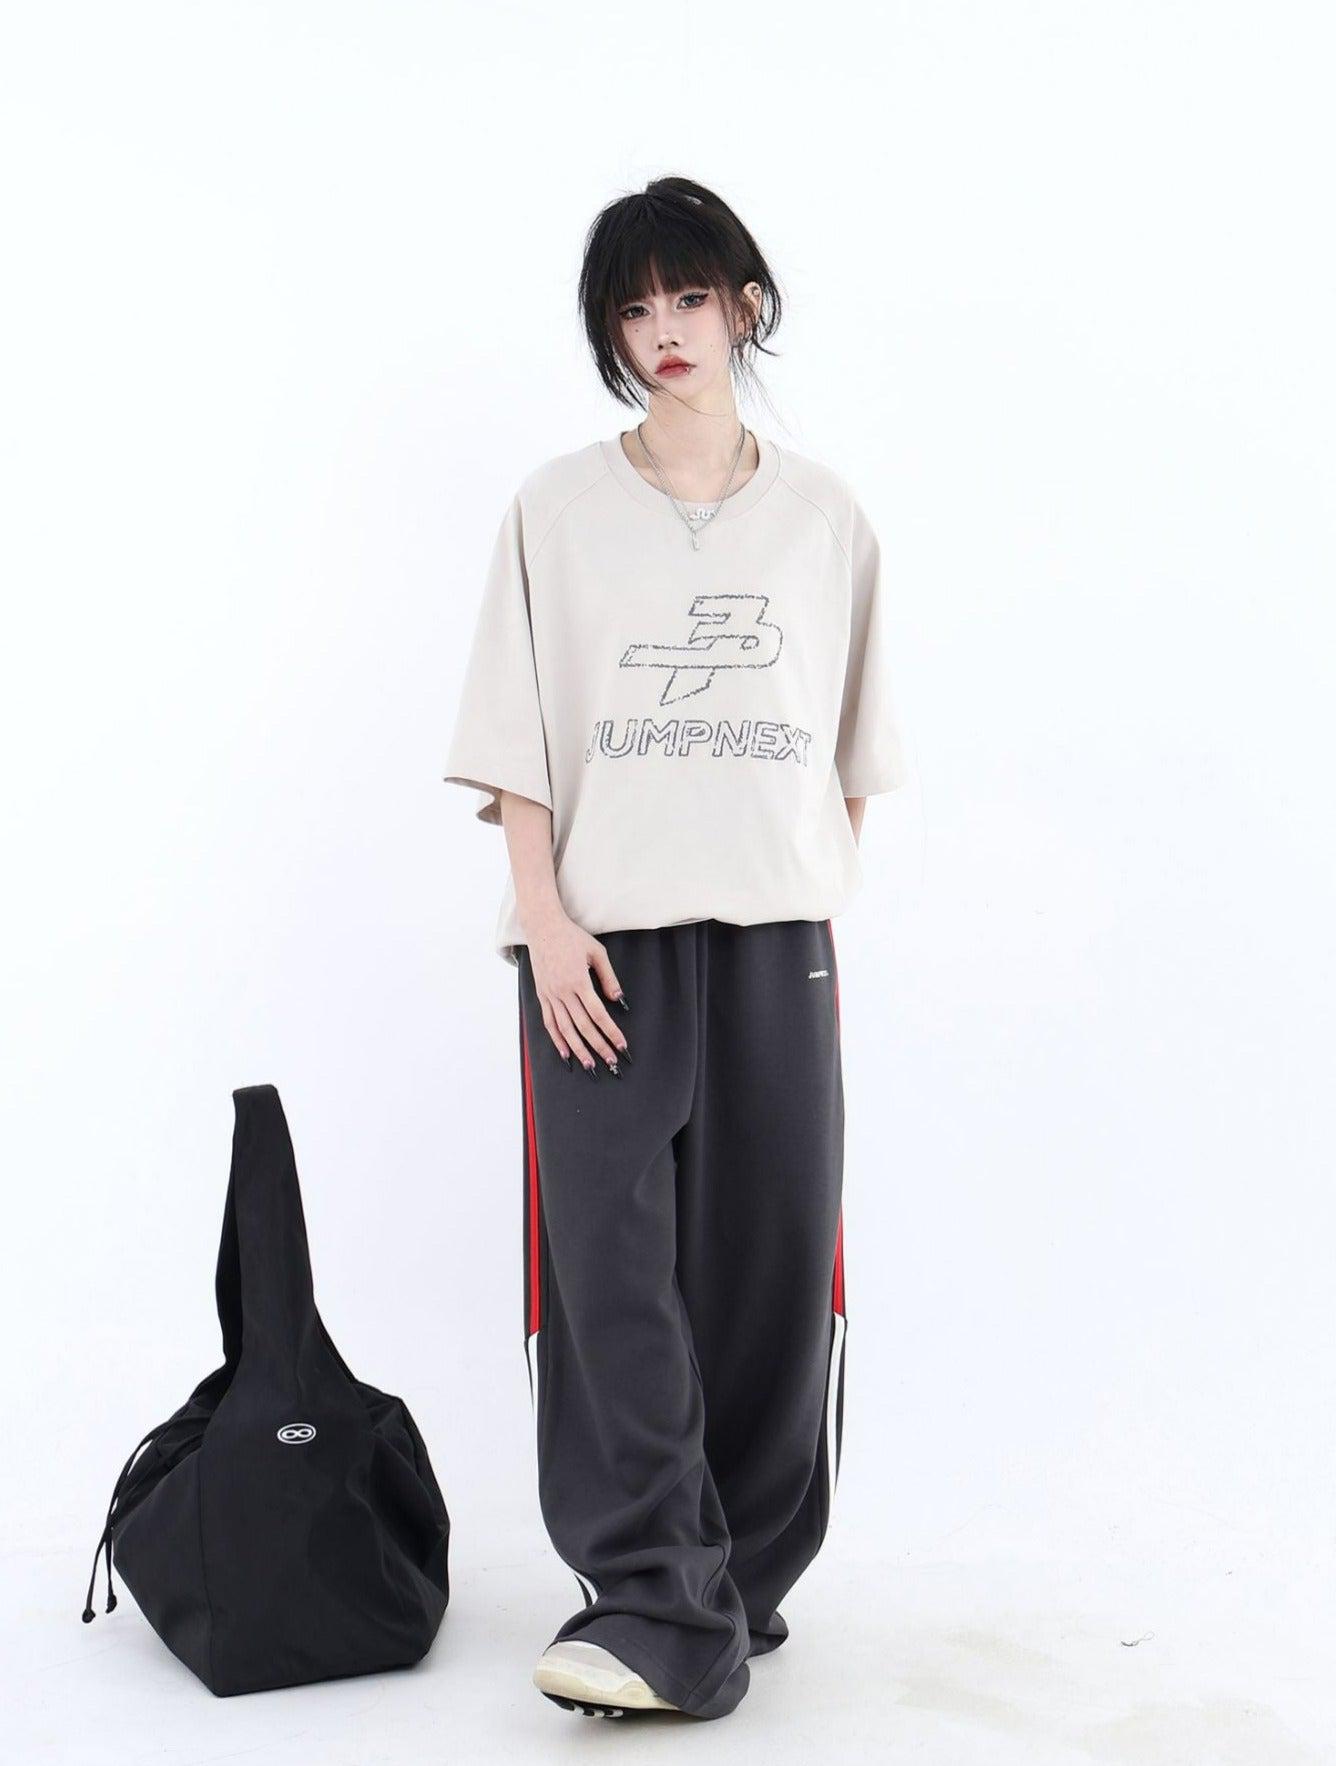 Jump Next Contrast Side Striped Sports Pants Korean Street Fashion Pants By Jump Next Shop Online at OH Vault